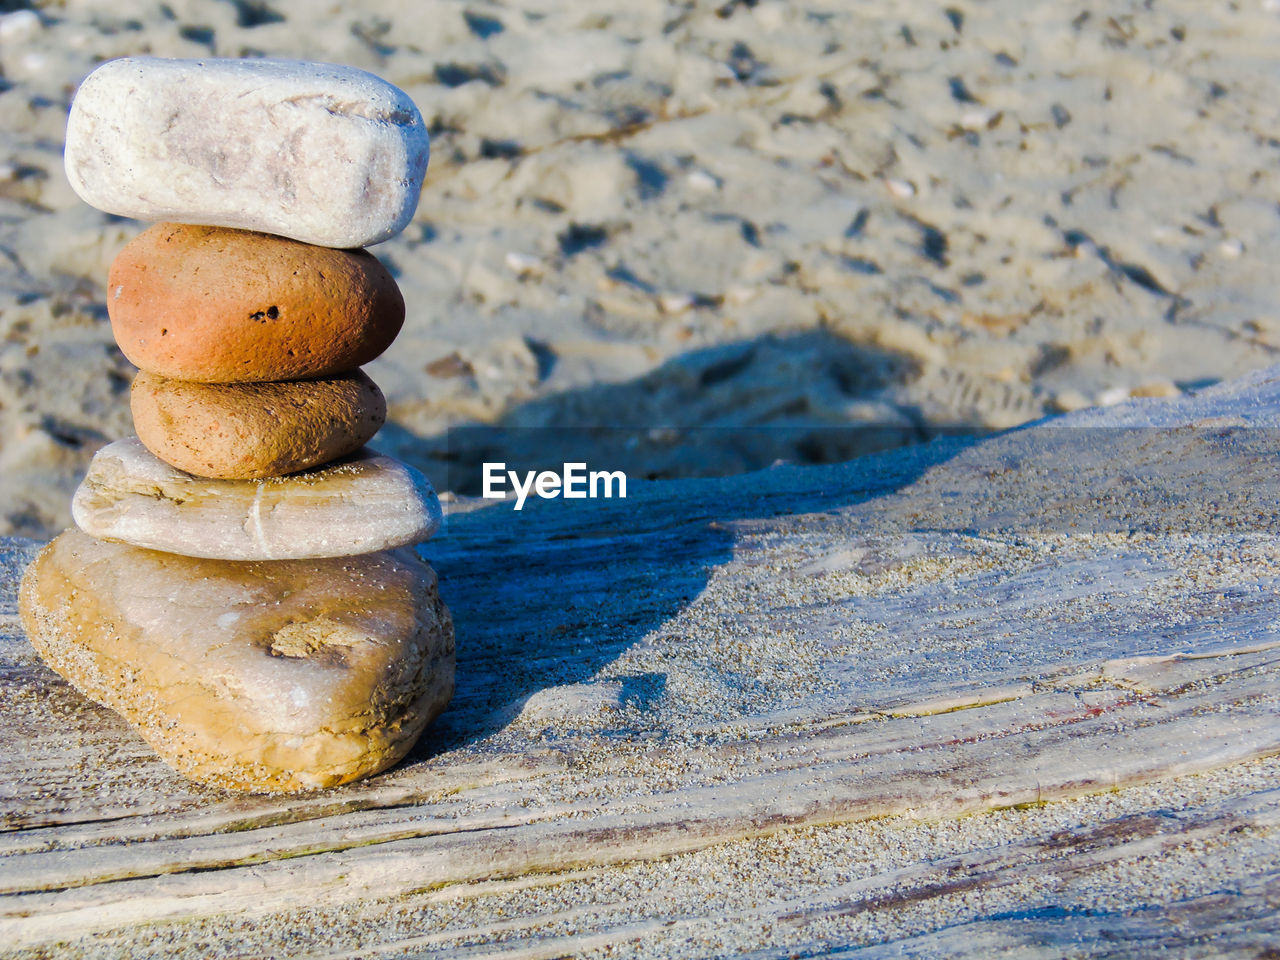 STACK OF ROCKS ON SHORE